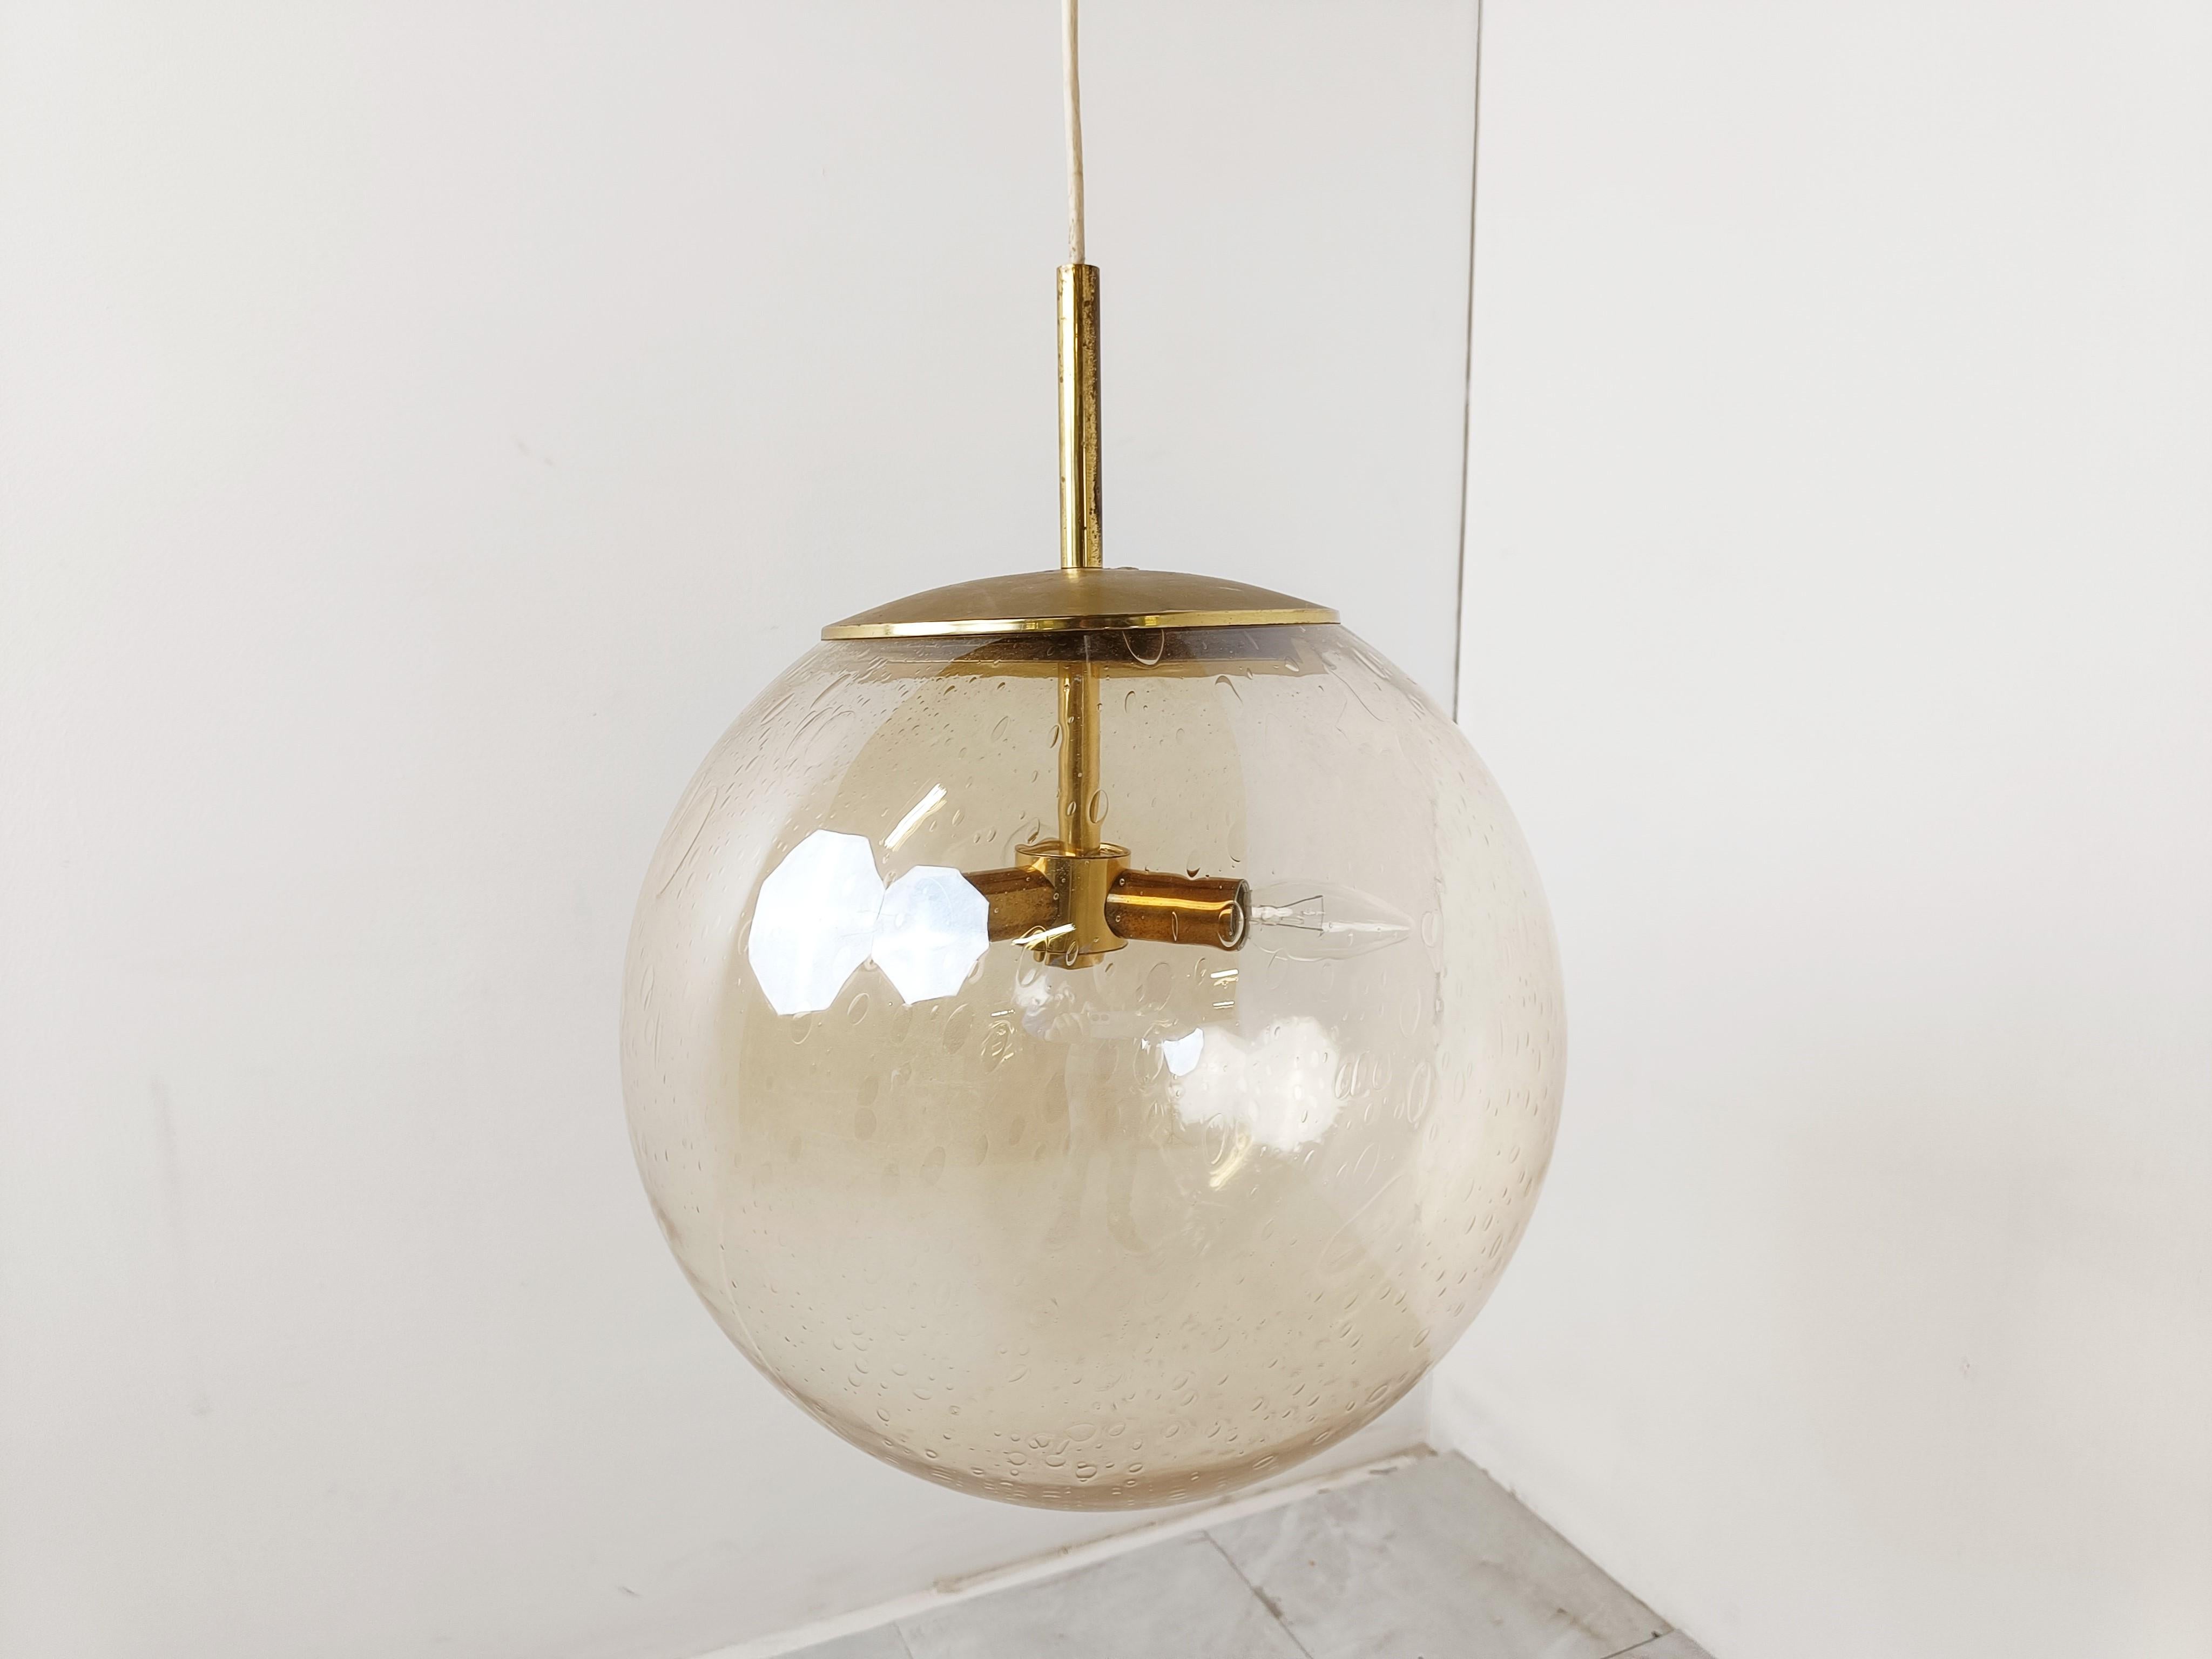 Midcentury glass pendant light by Glashutte Limburg. 

Amber coloured glass which emits a nice light.

Brass sockets and shade holder.

The wire can be lengthened or shortened as desired.

1960s - Germany

Dimensions:
Height: